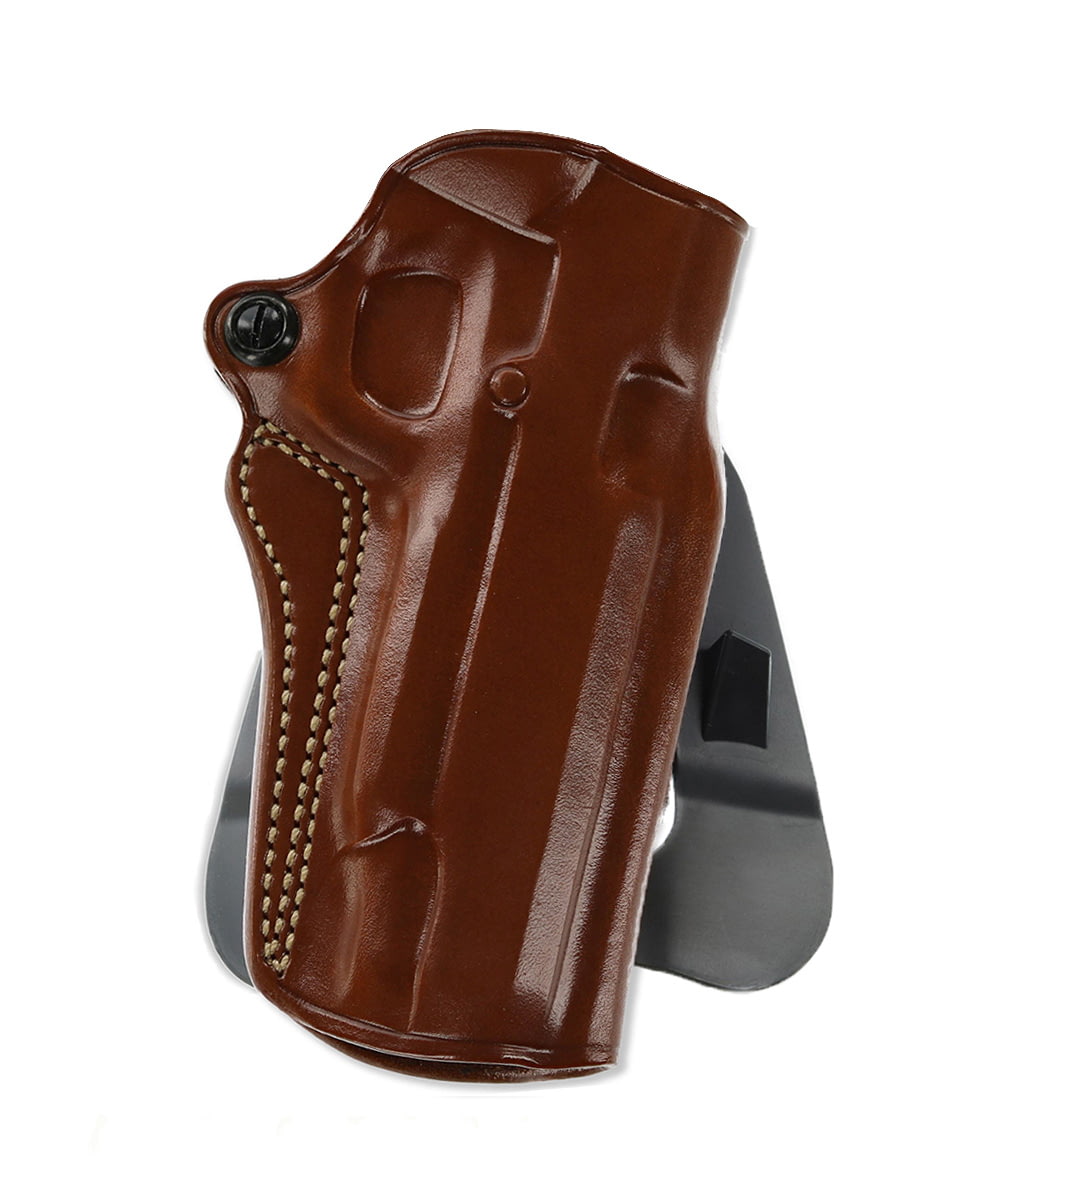 Galco Speed Master 2.0 Paddle/Belt Holster Right Hand Tan SM2-266R